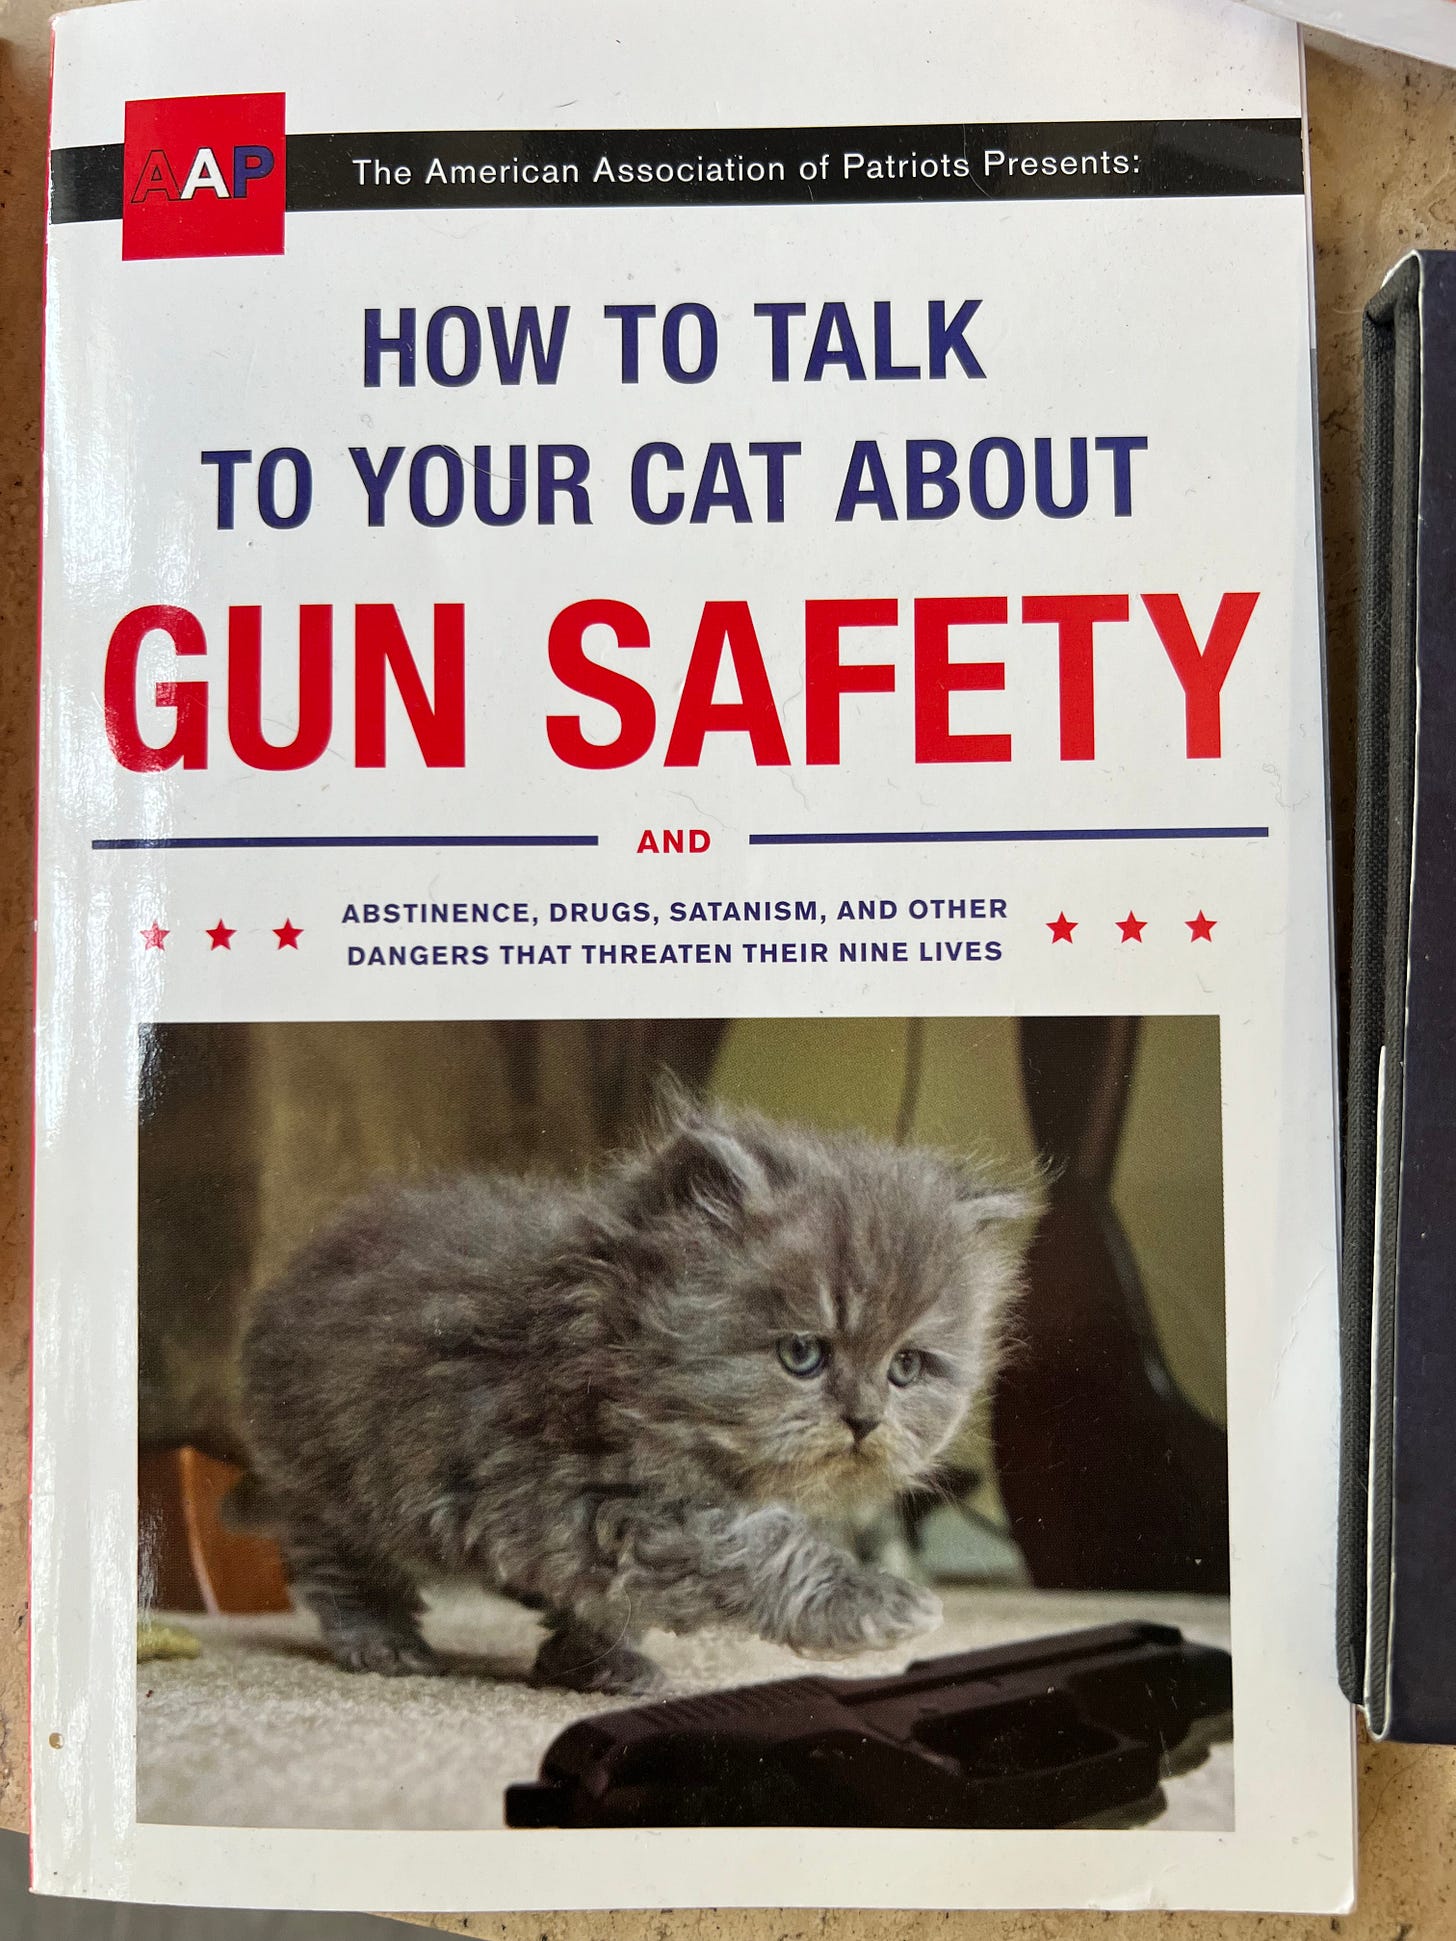 A book from the American association of patriots entitled: How to Talk to Your Cat About Gun Safety and Abstinence, drugs, statism, and other dangers that threaten their lives. A photo of a grey kitten about to paw at a handgun.